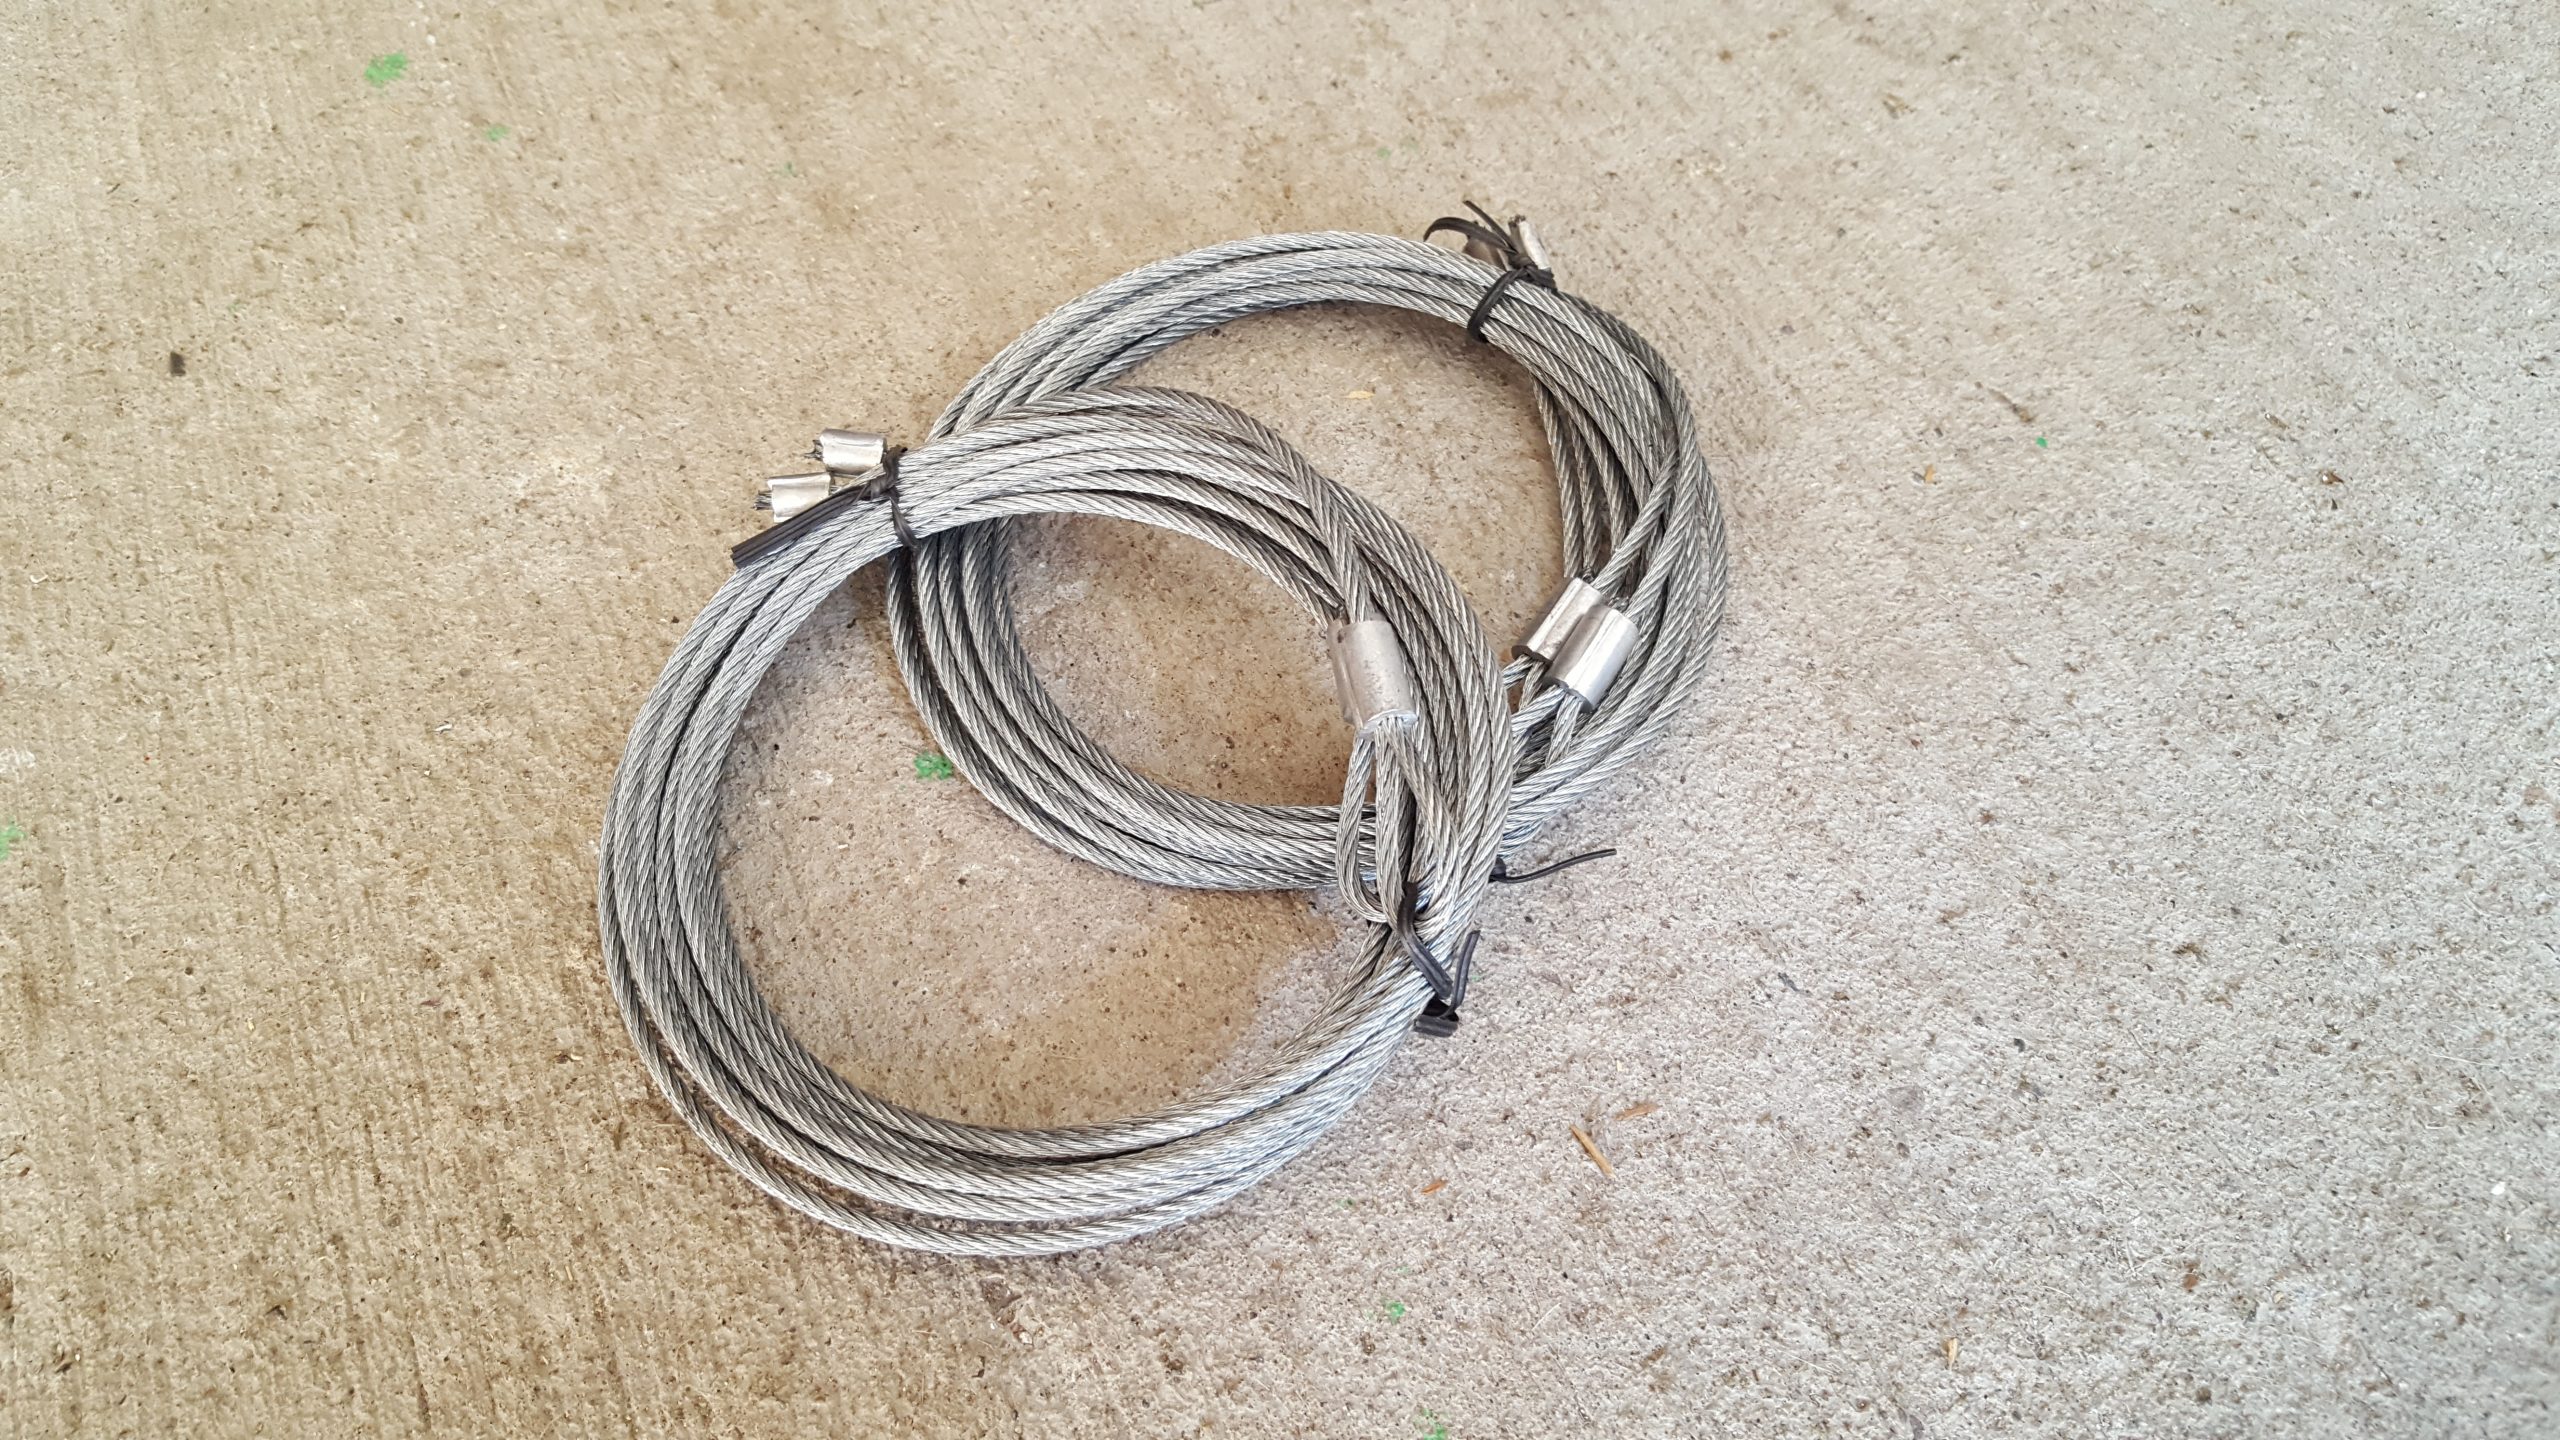 Modern Garage Door Replacement Cables for Simple Design